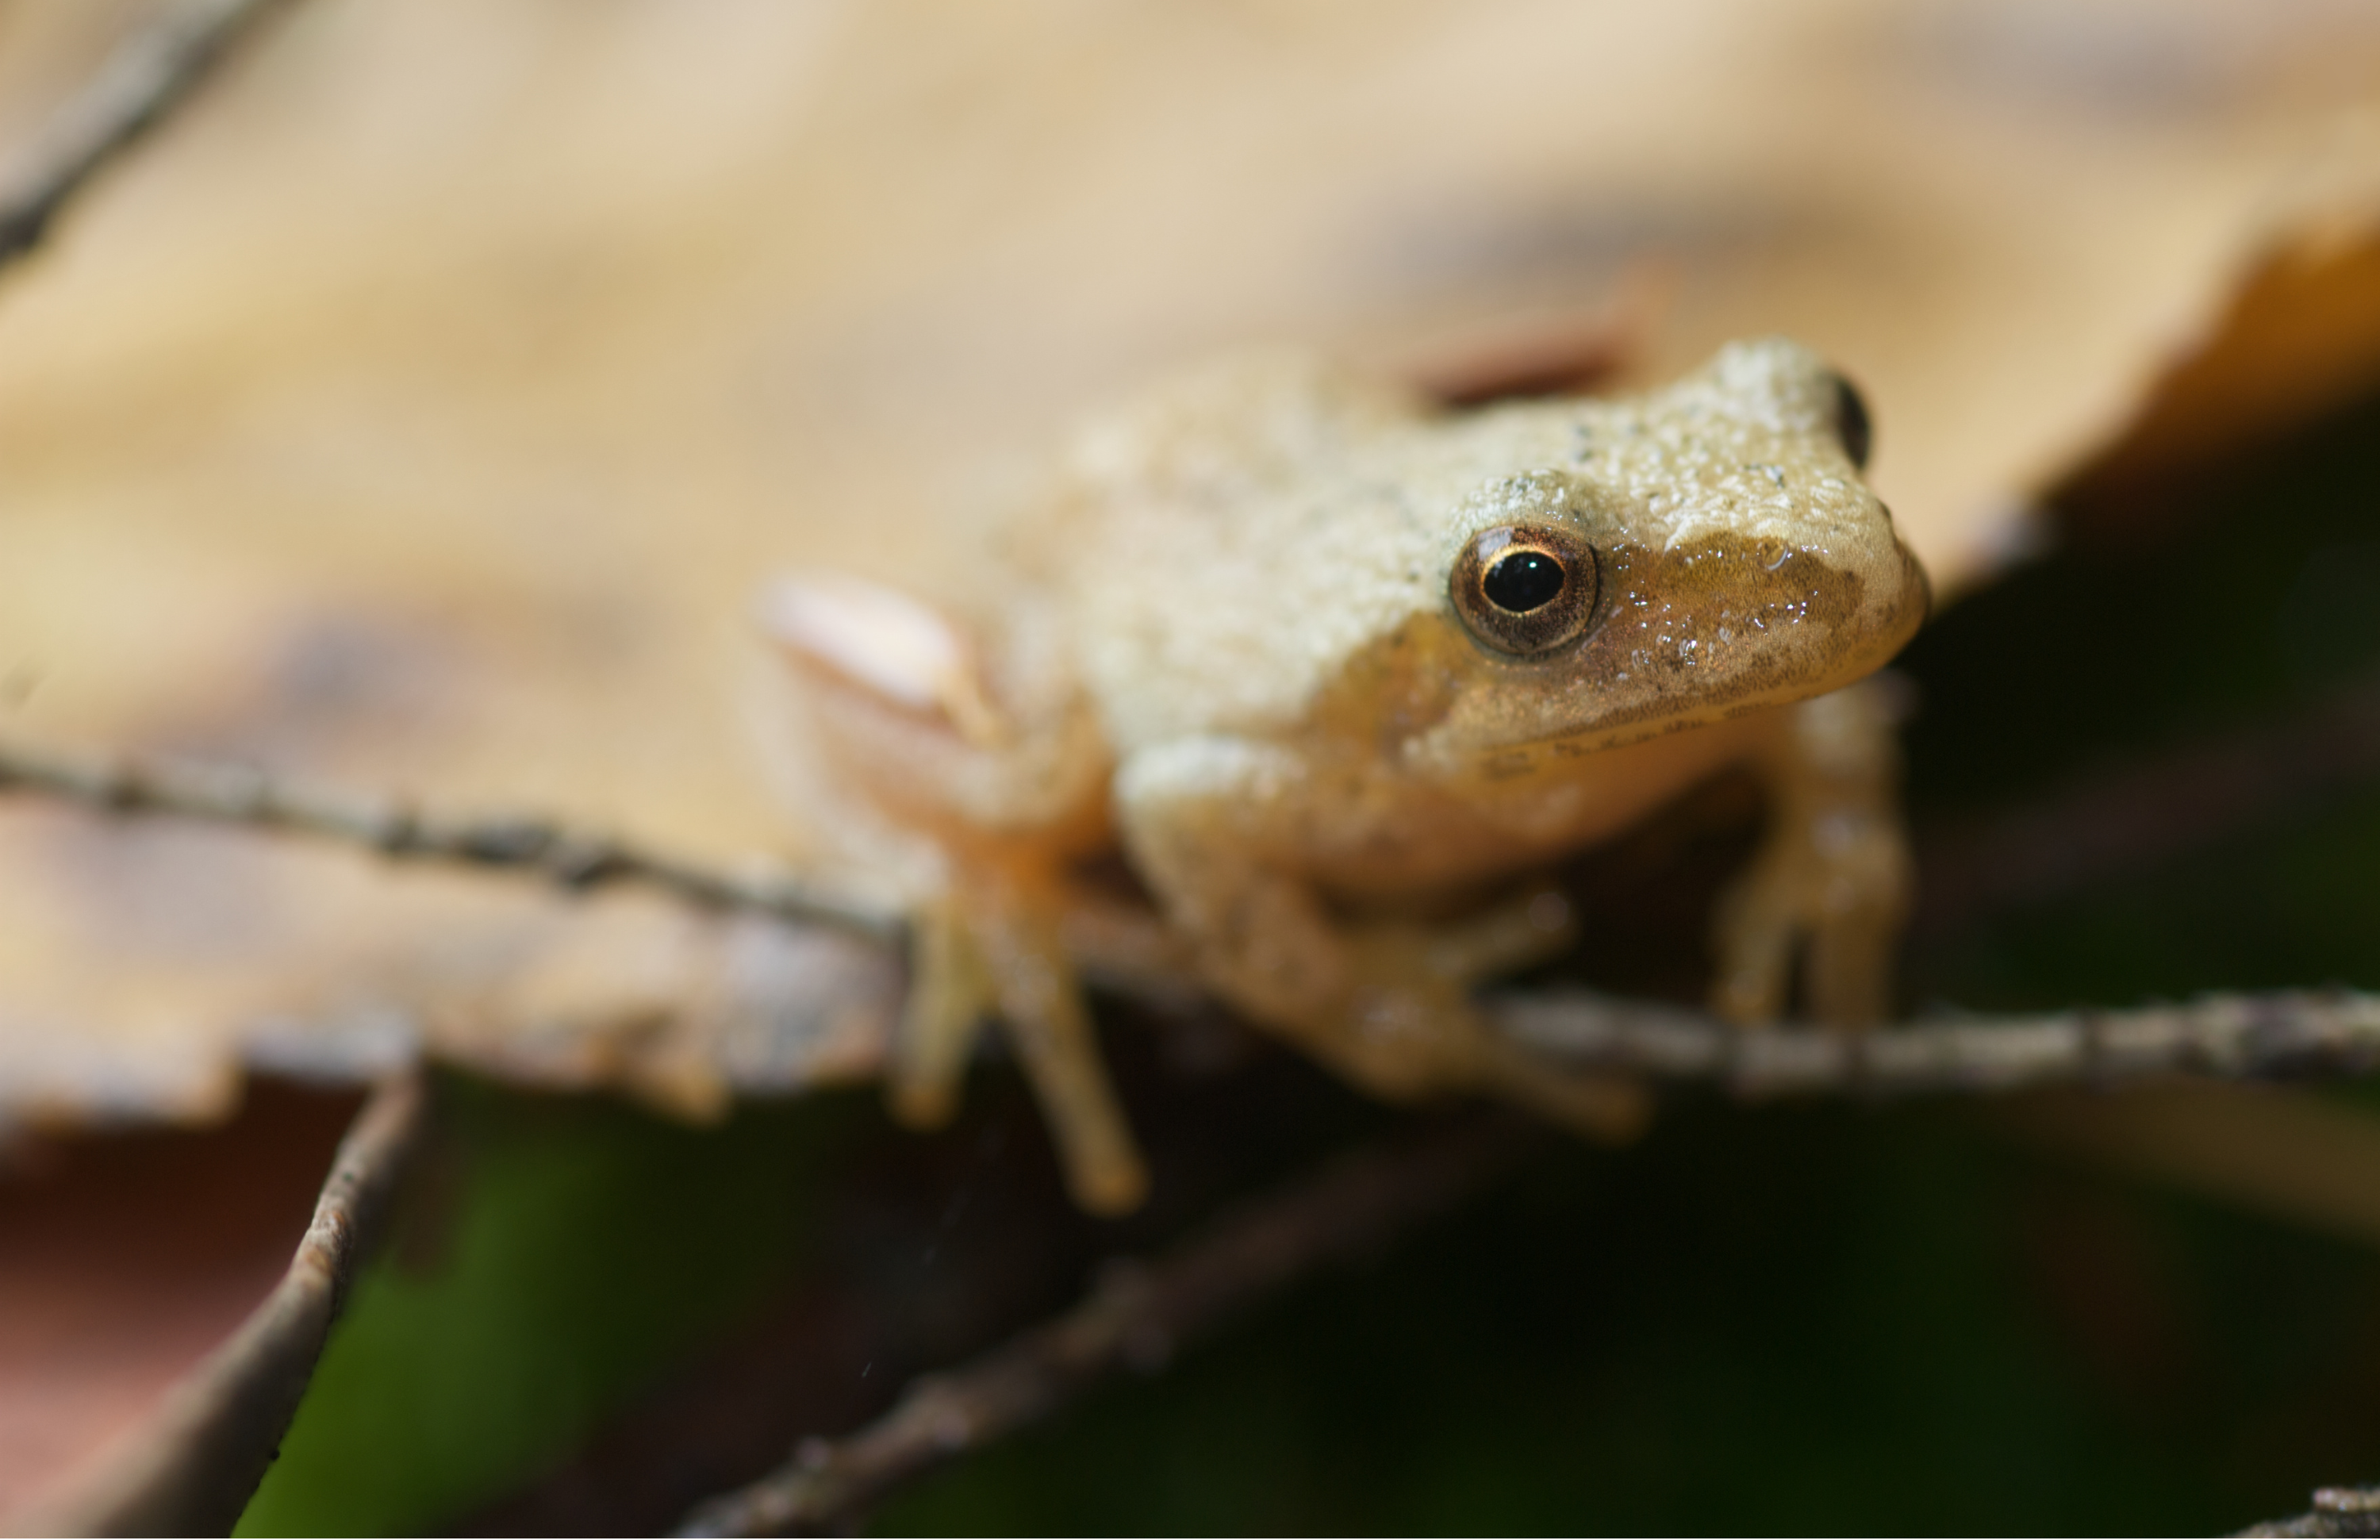 A closeup shot of a Spring Peeper frog resting on a leaf and twig.